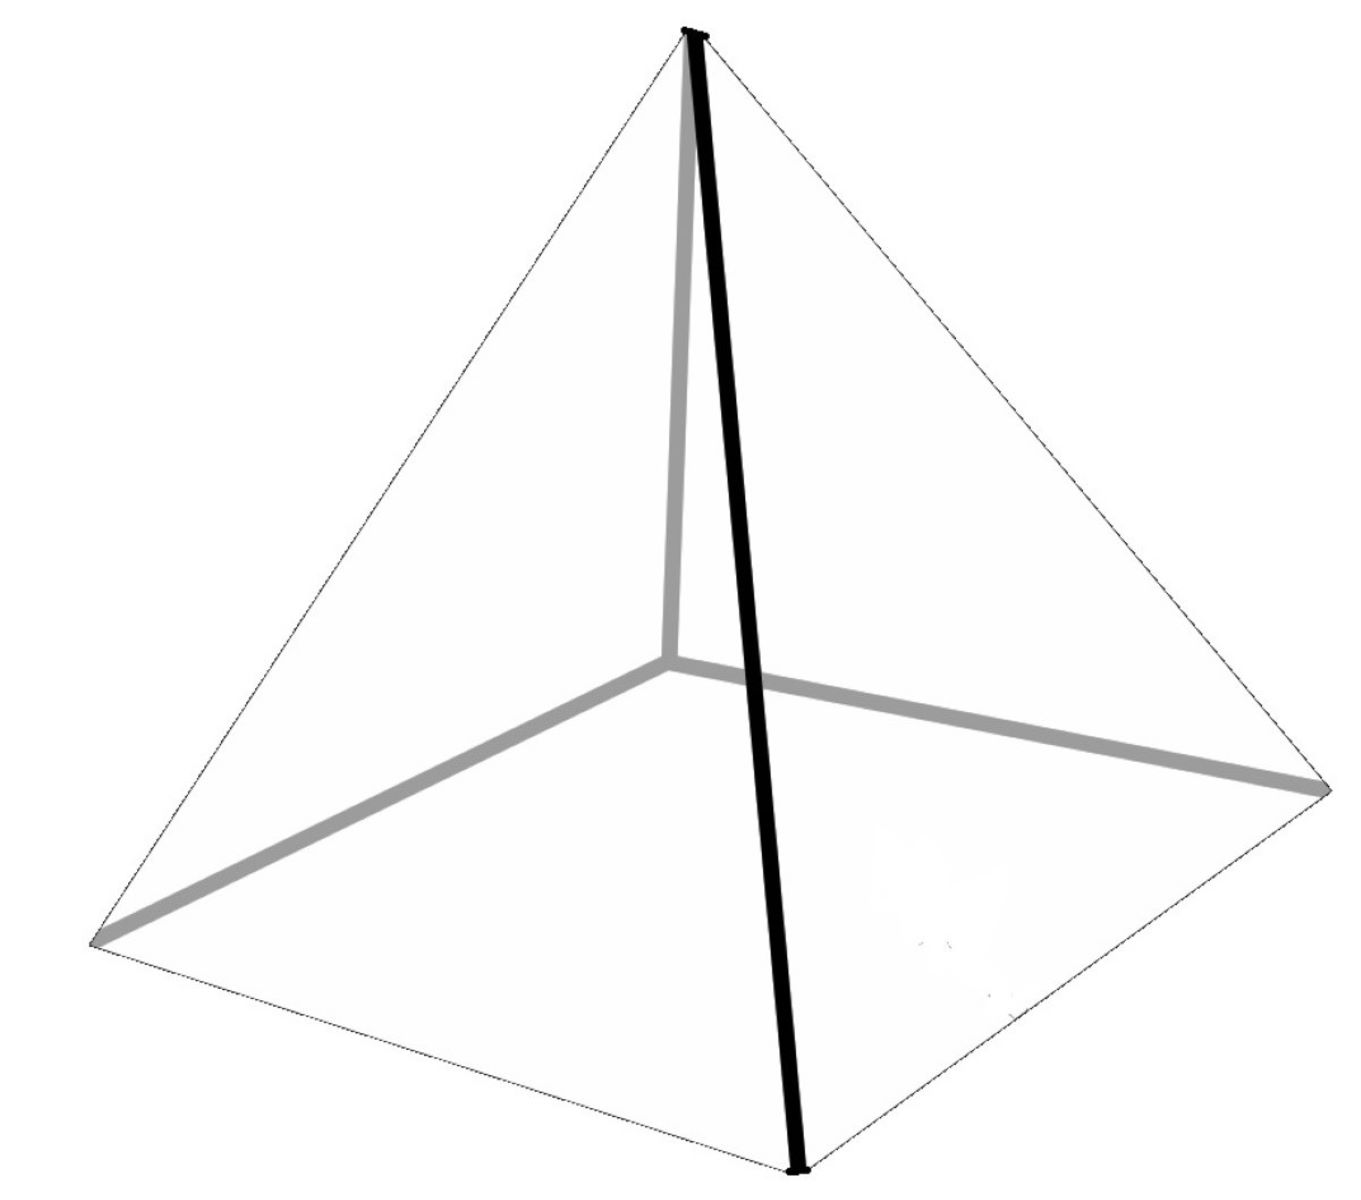 Discover The Height And Volume Of A Triangular Pyramid With Mind-Blowing Precision!